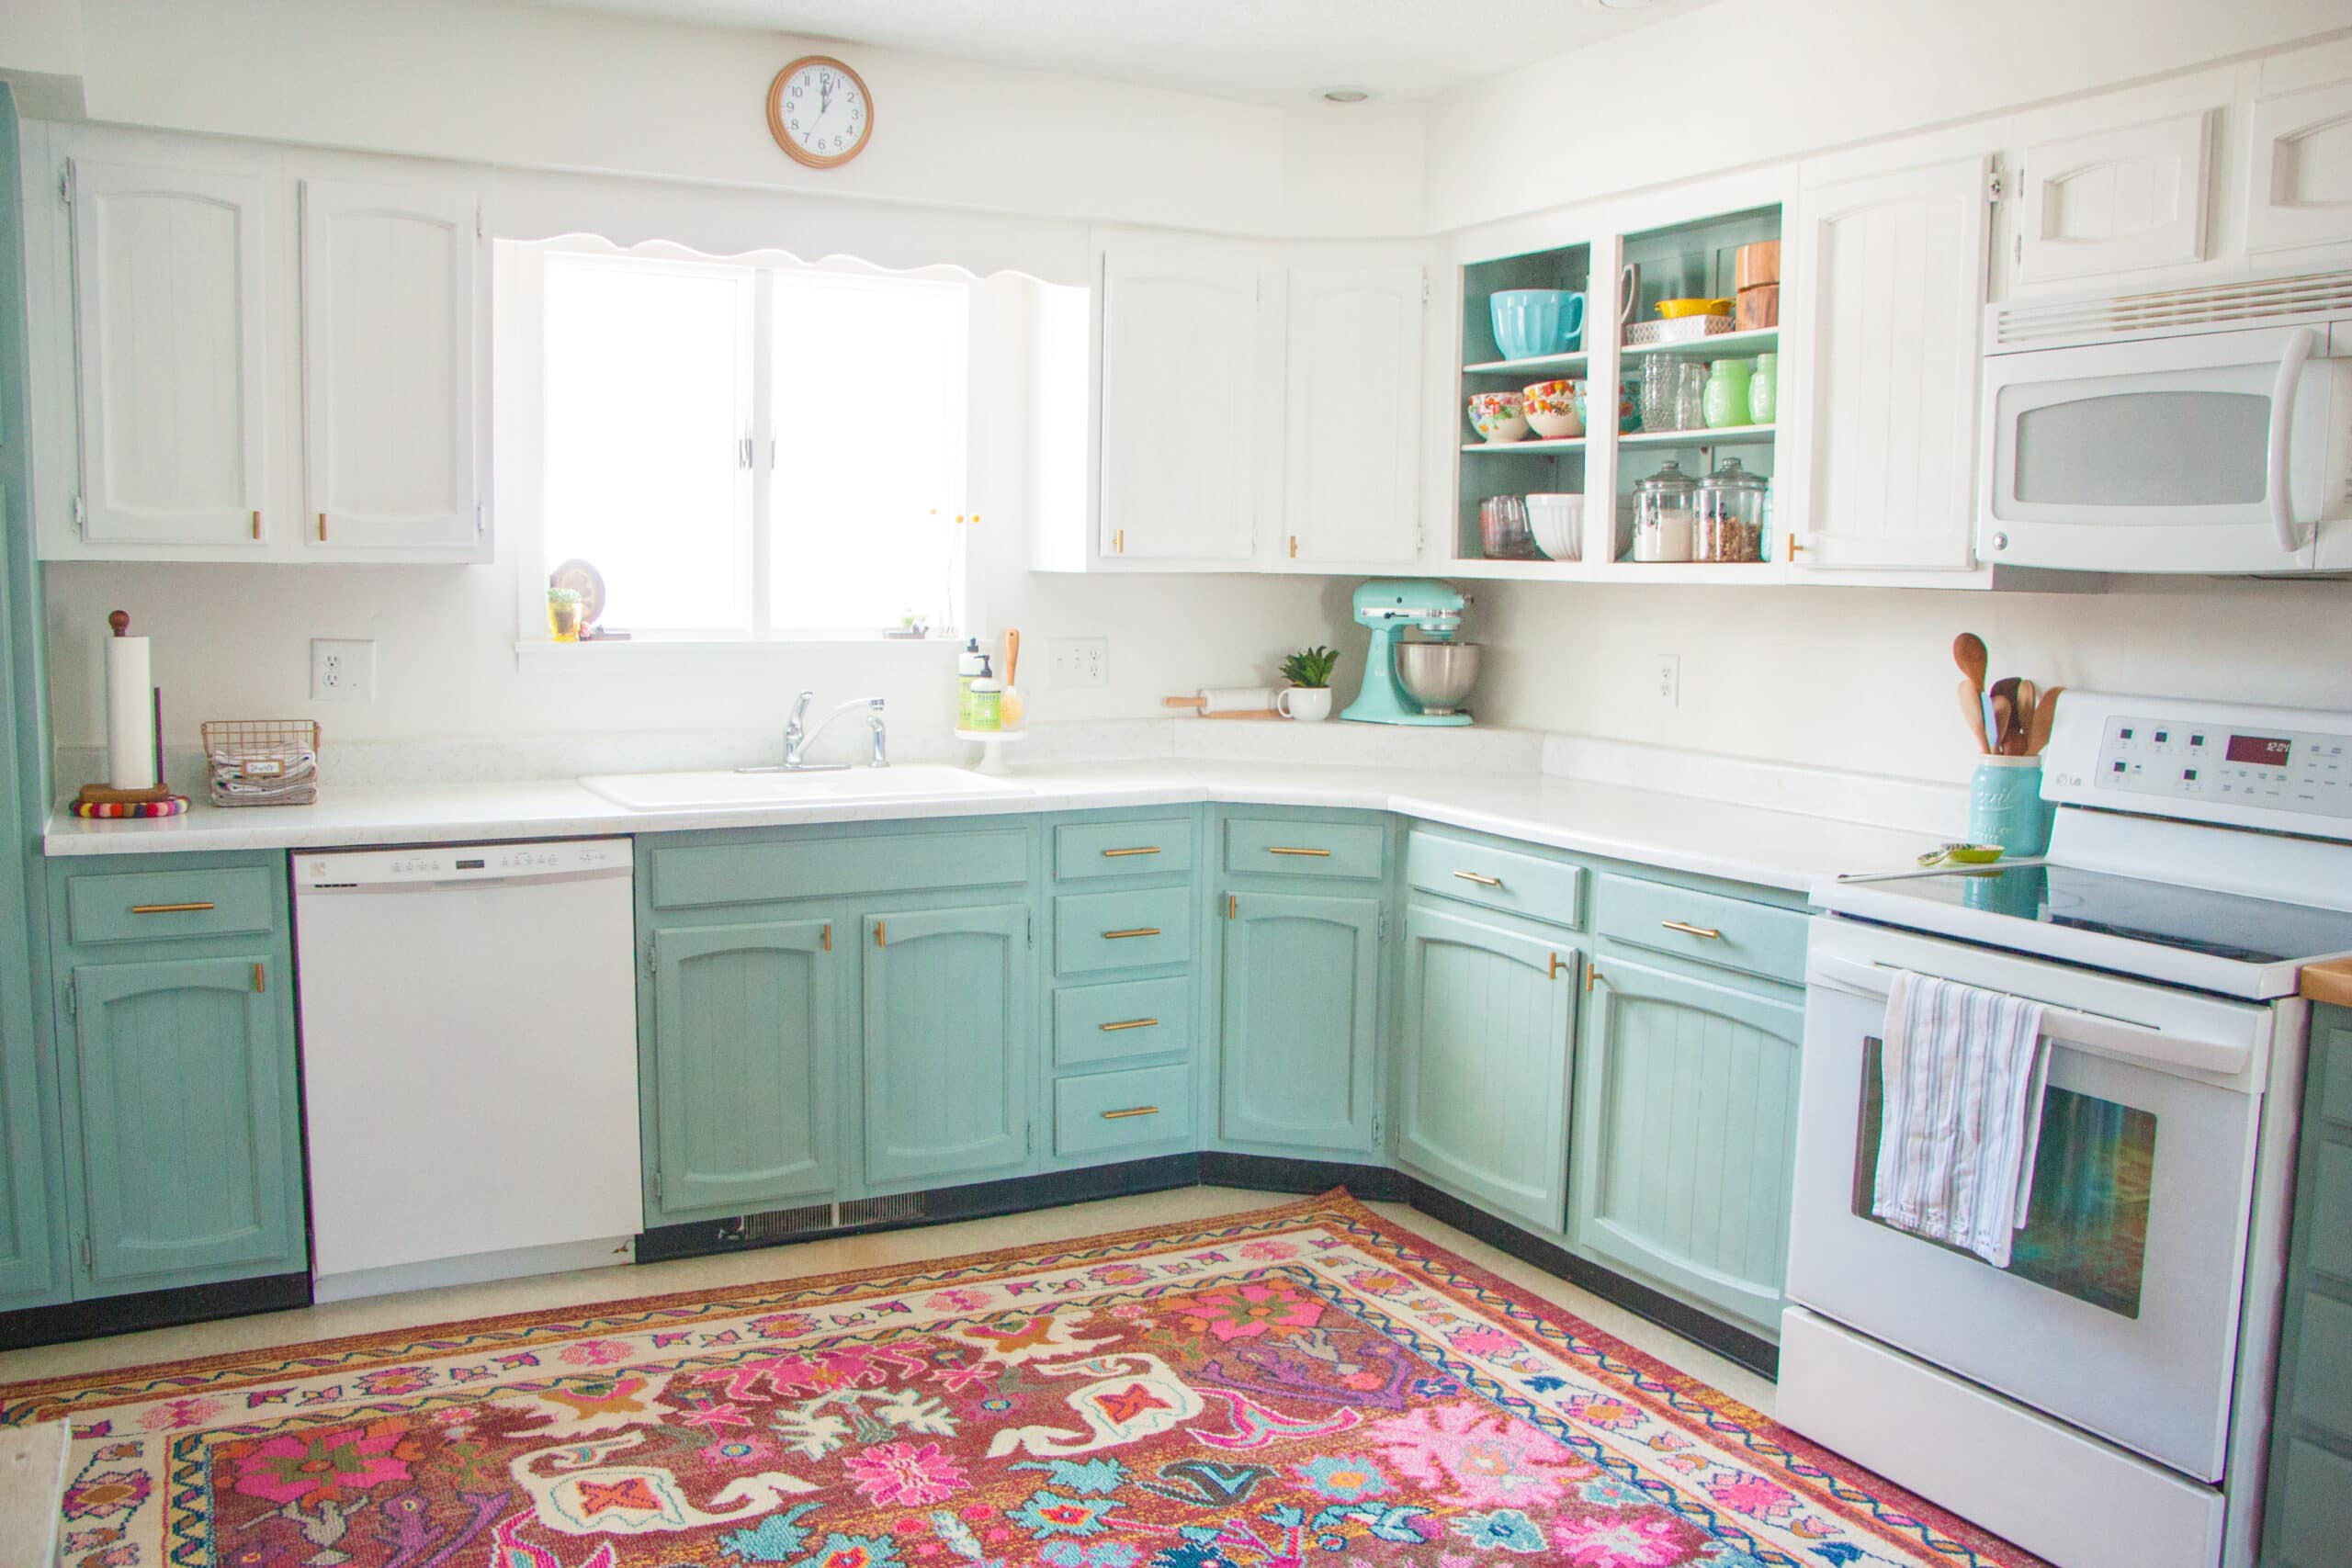 From white laminate kitchen to a green and white two-toned kitchen -  Cuckoo4Design